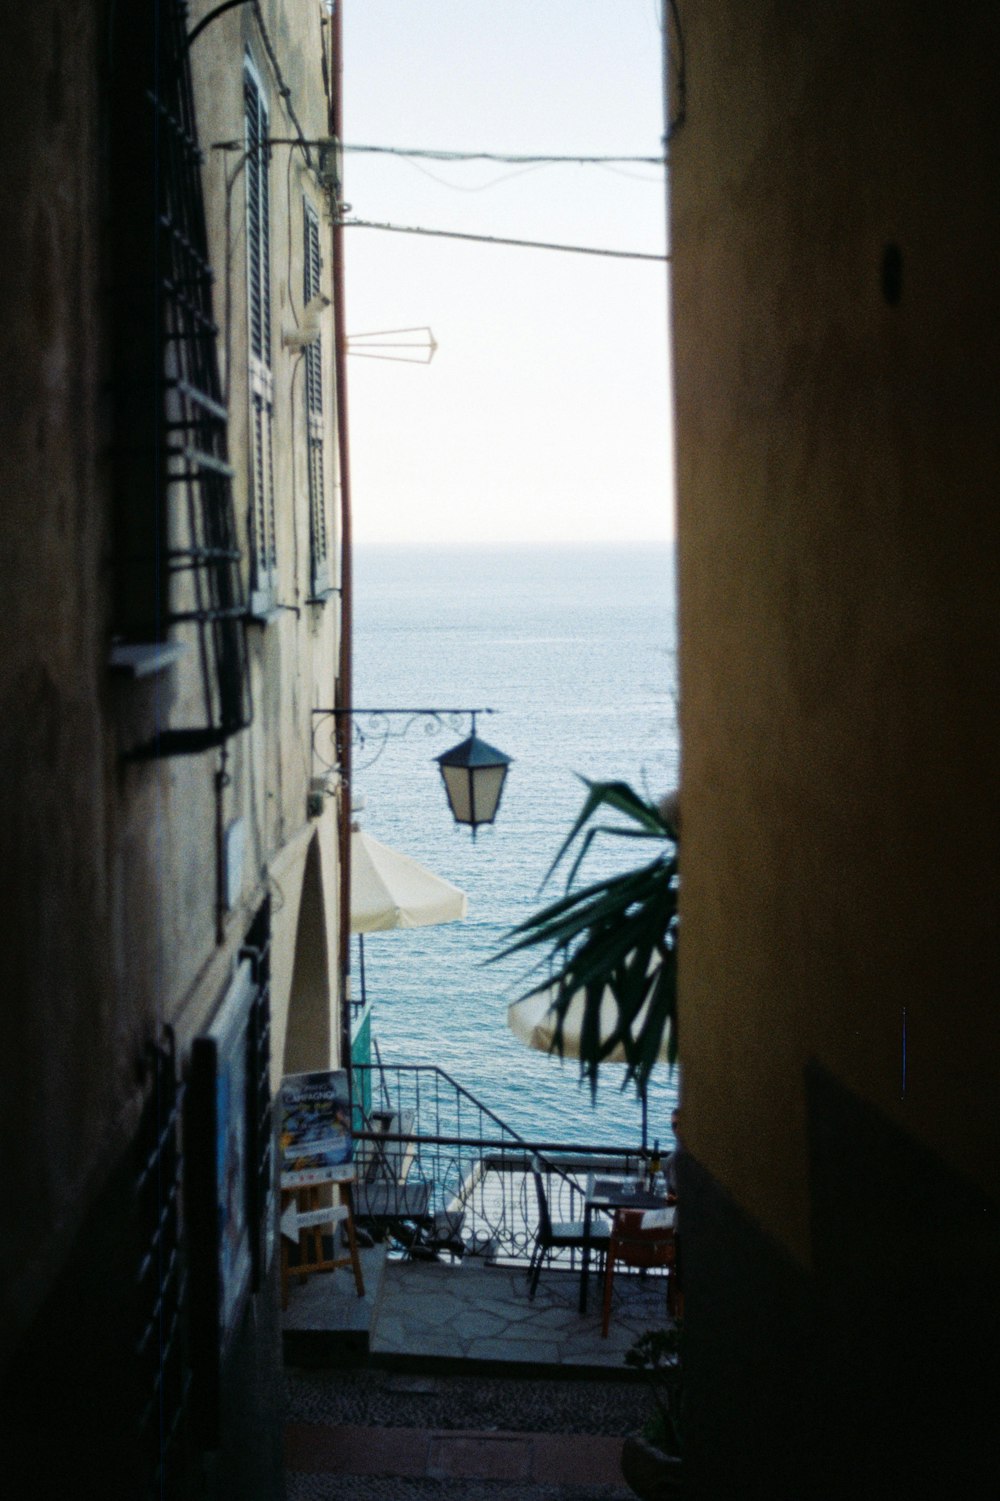 a view of the ocean from an alley way